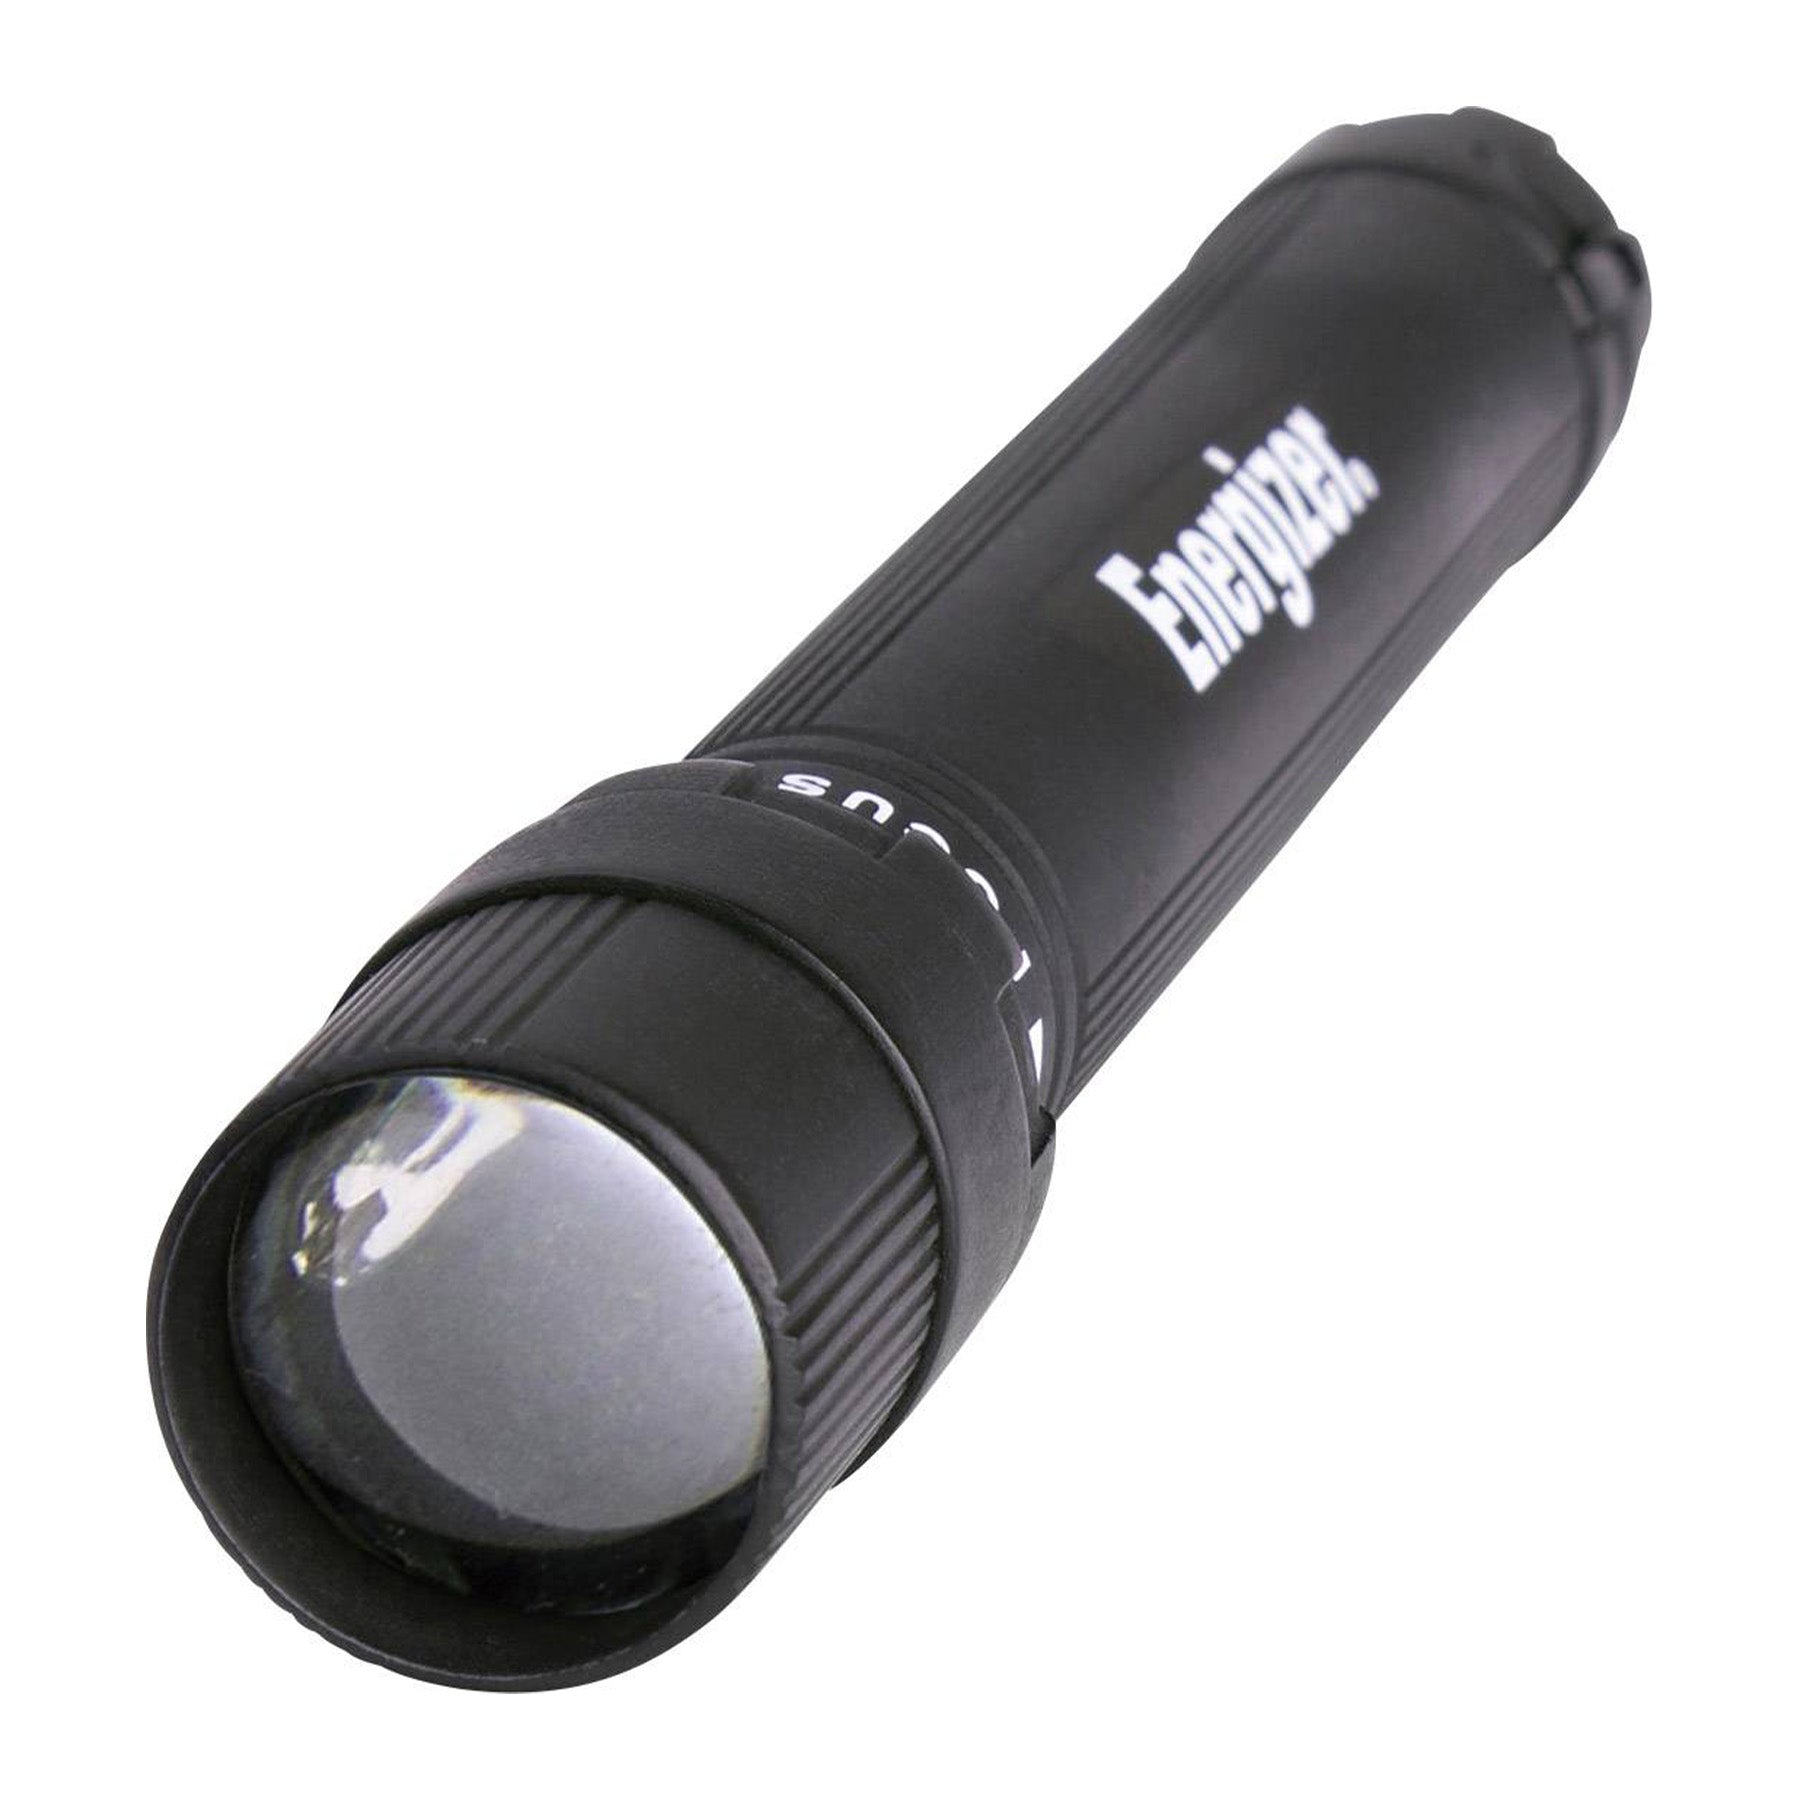 LED Torch - 50 LumenRun time 45 hours